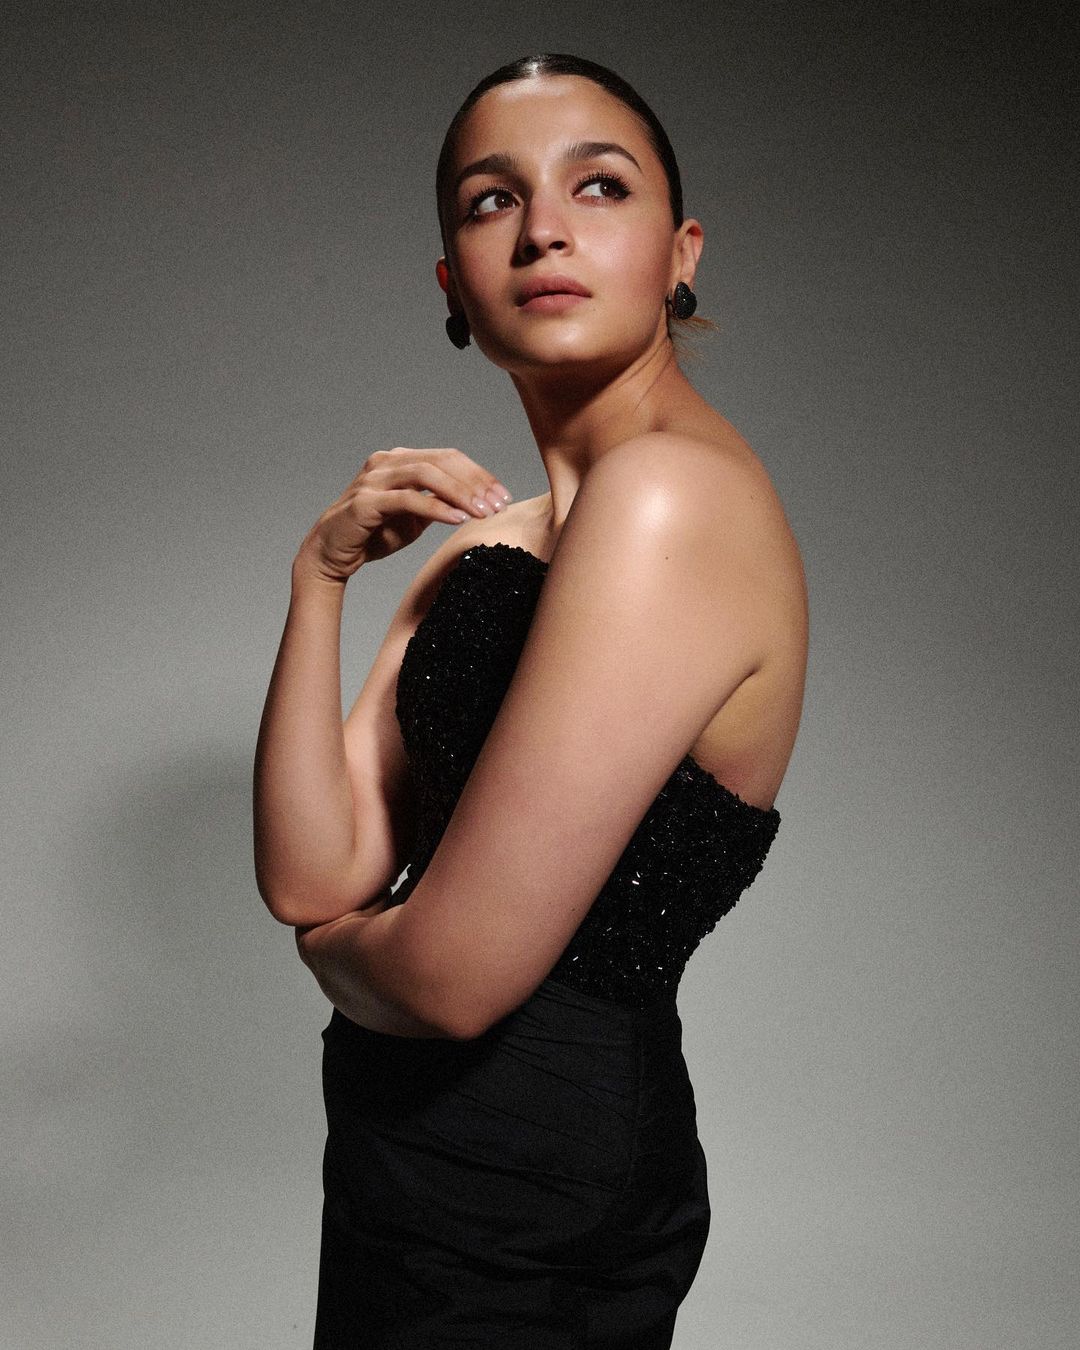 Alia Bhatt Stuns In A Black & White Shimmery Dress While Subtly Flaunting  Her Baby Bump, Netizens React, “It's High Time She Should Stop Wearing  Heels”